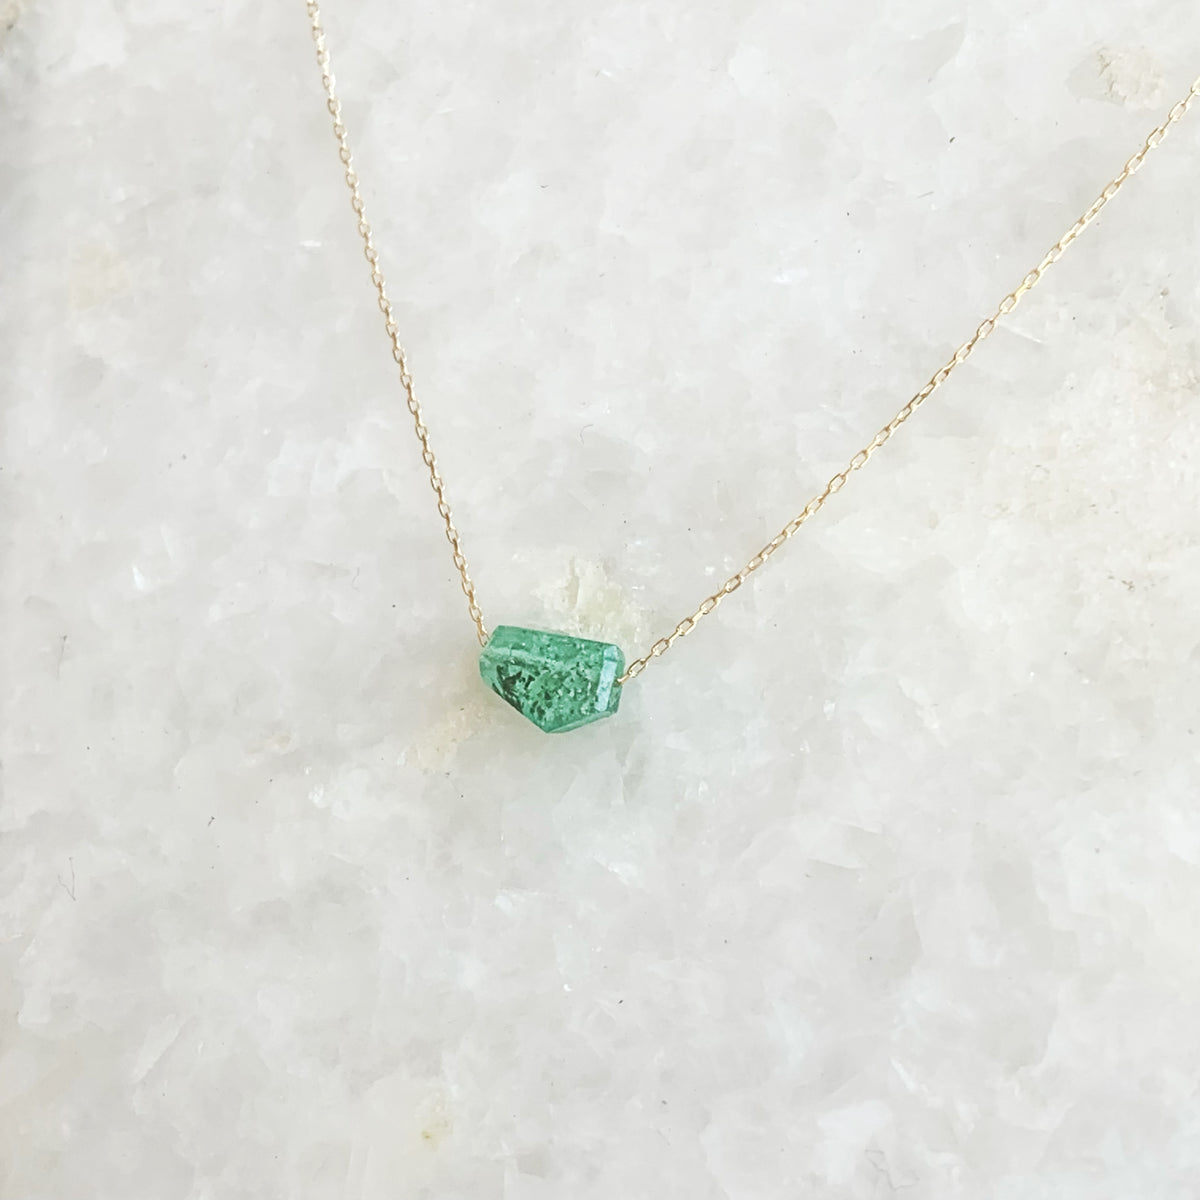 Land of Oz Emerald Necklace